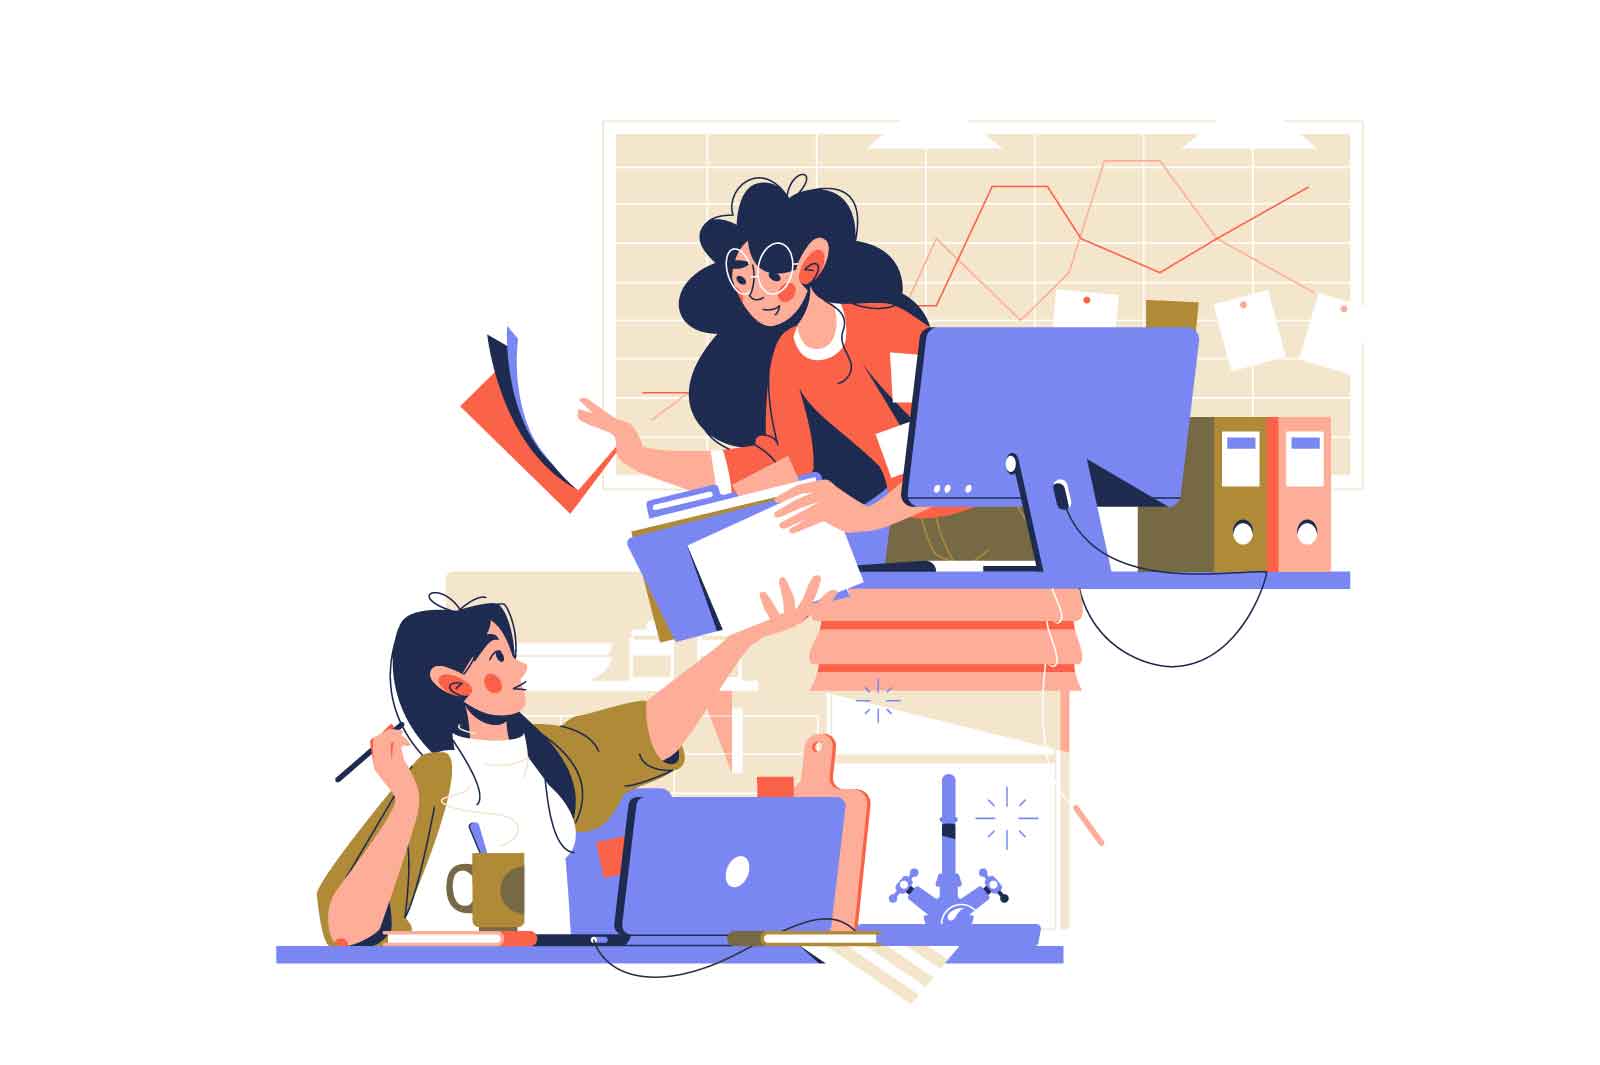 Difference between working from home and office vector illustration. Coworkers share documents flat style. Remote job, freelancer concept